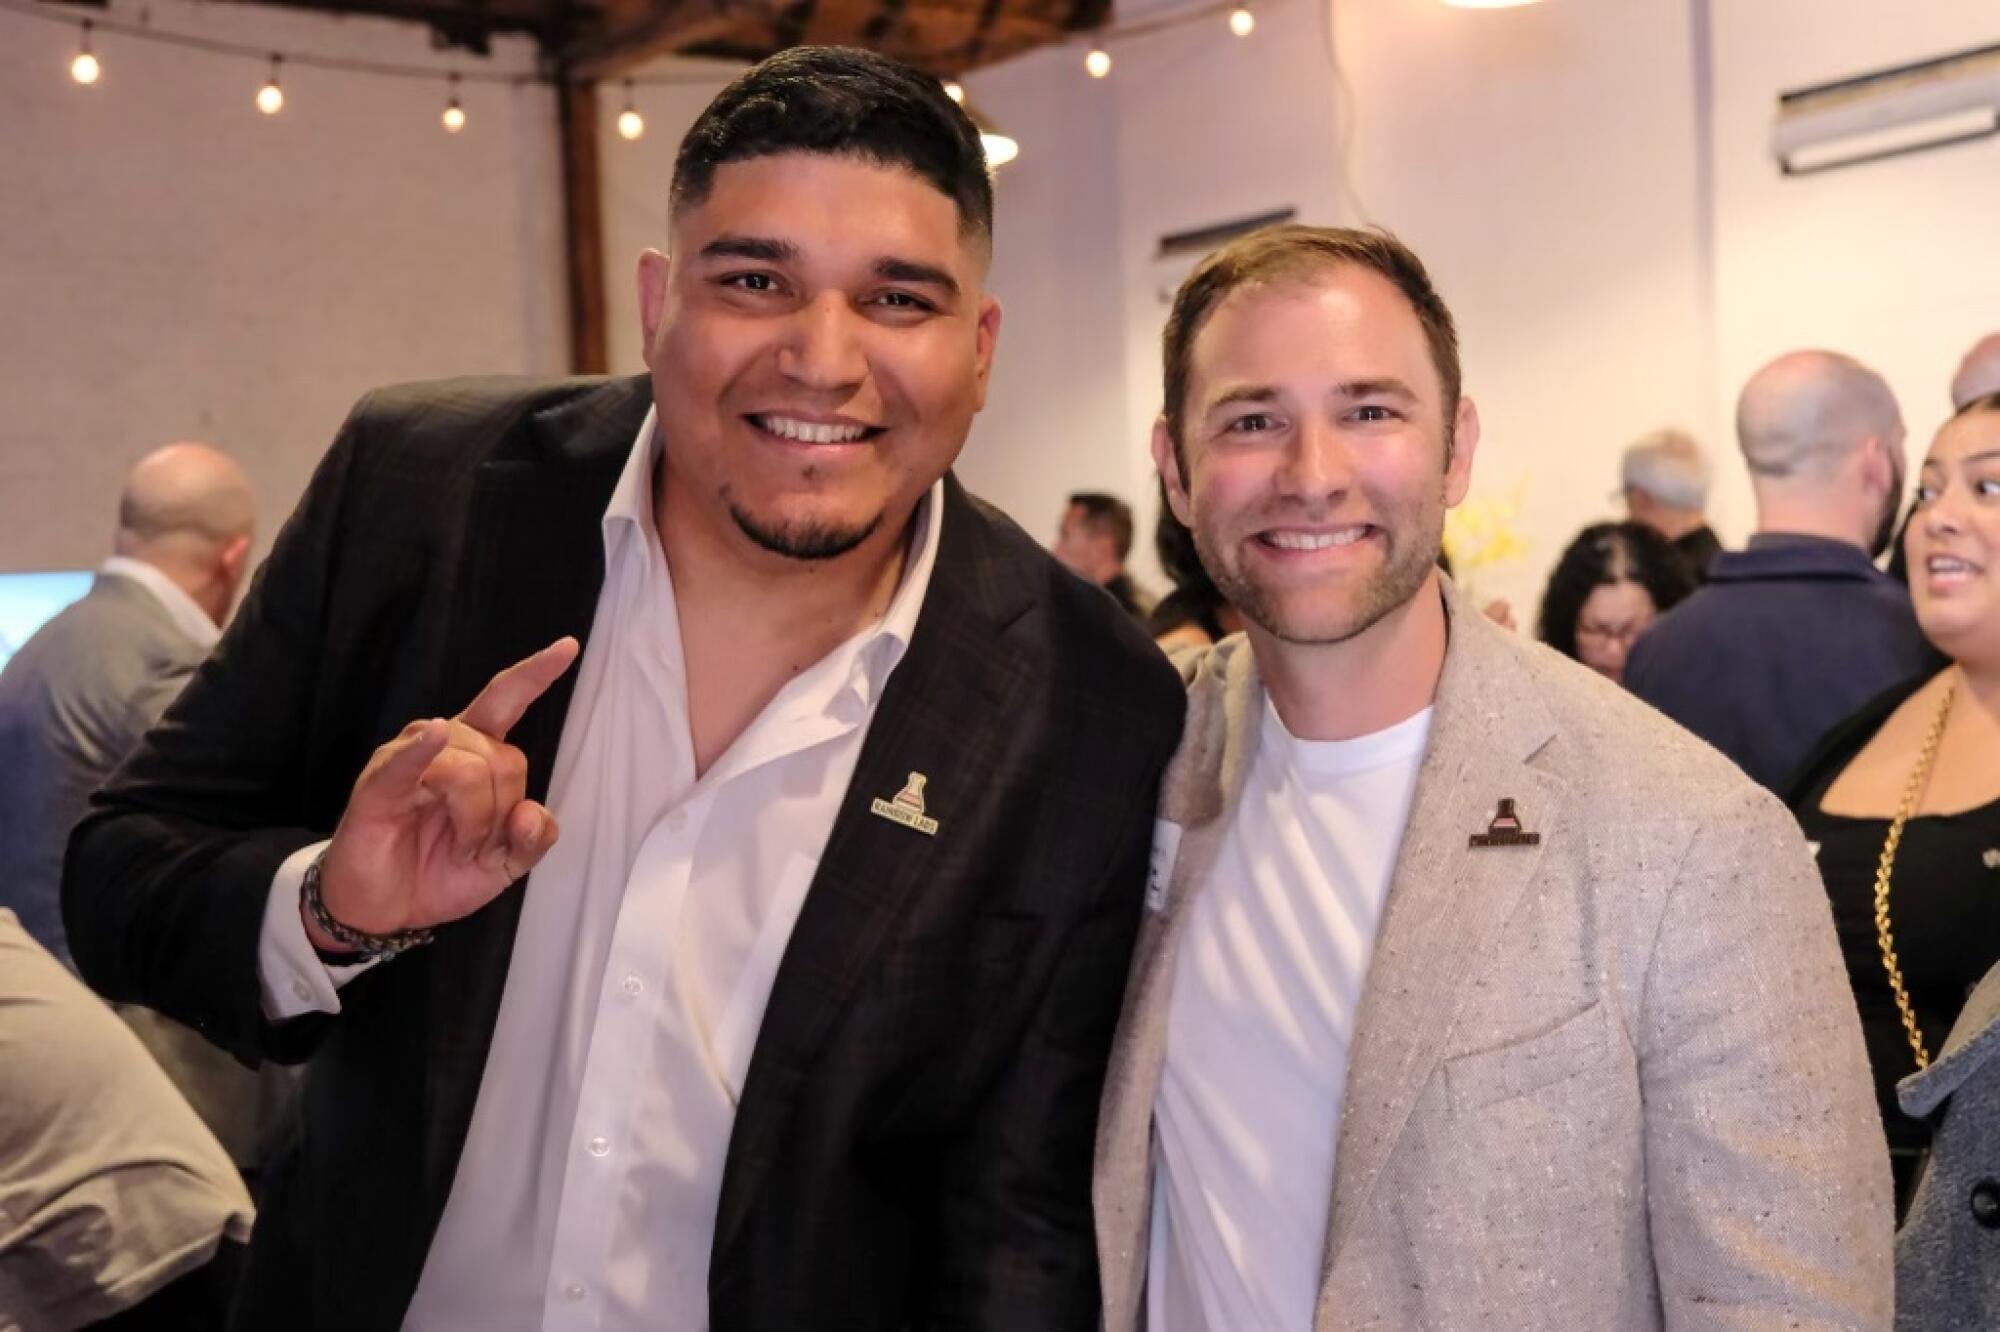 Luis Vasquez, Co-founder of Rainbow Labs, left, and Jacob Toups, Executive Director, right.